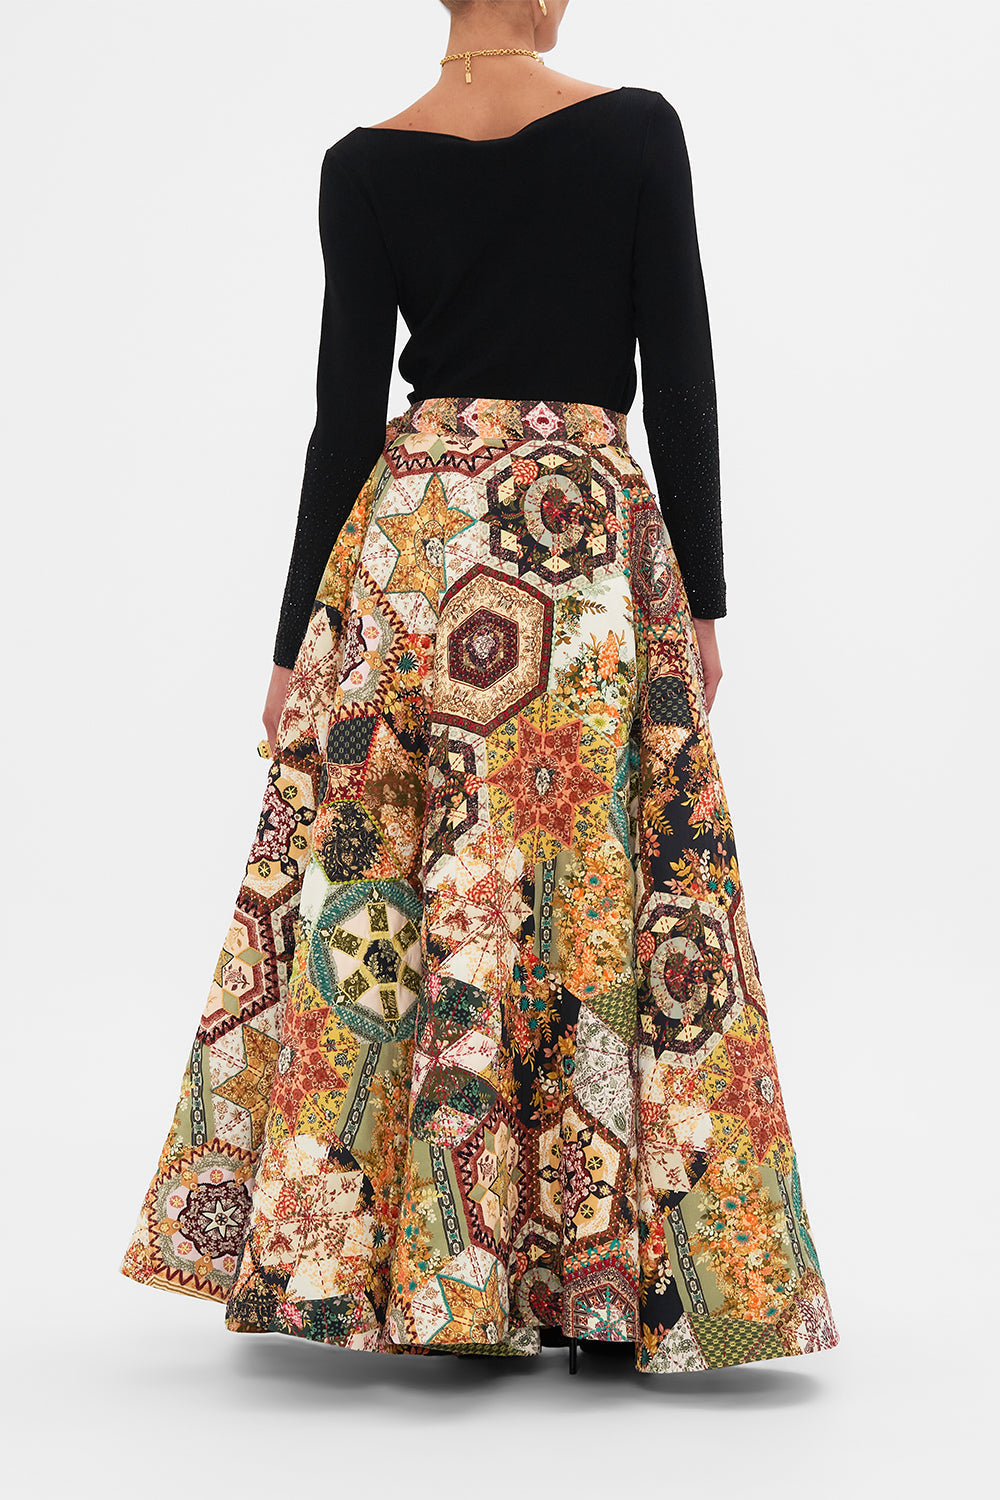 CAMILLA Black Reversible Embroidered Quilted Wrap Skirt in Stitched in Time print